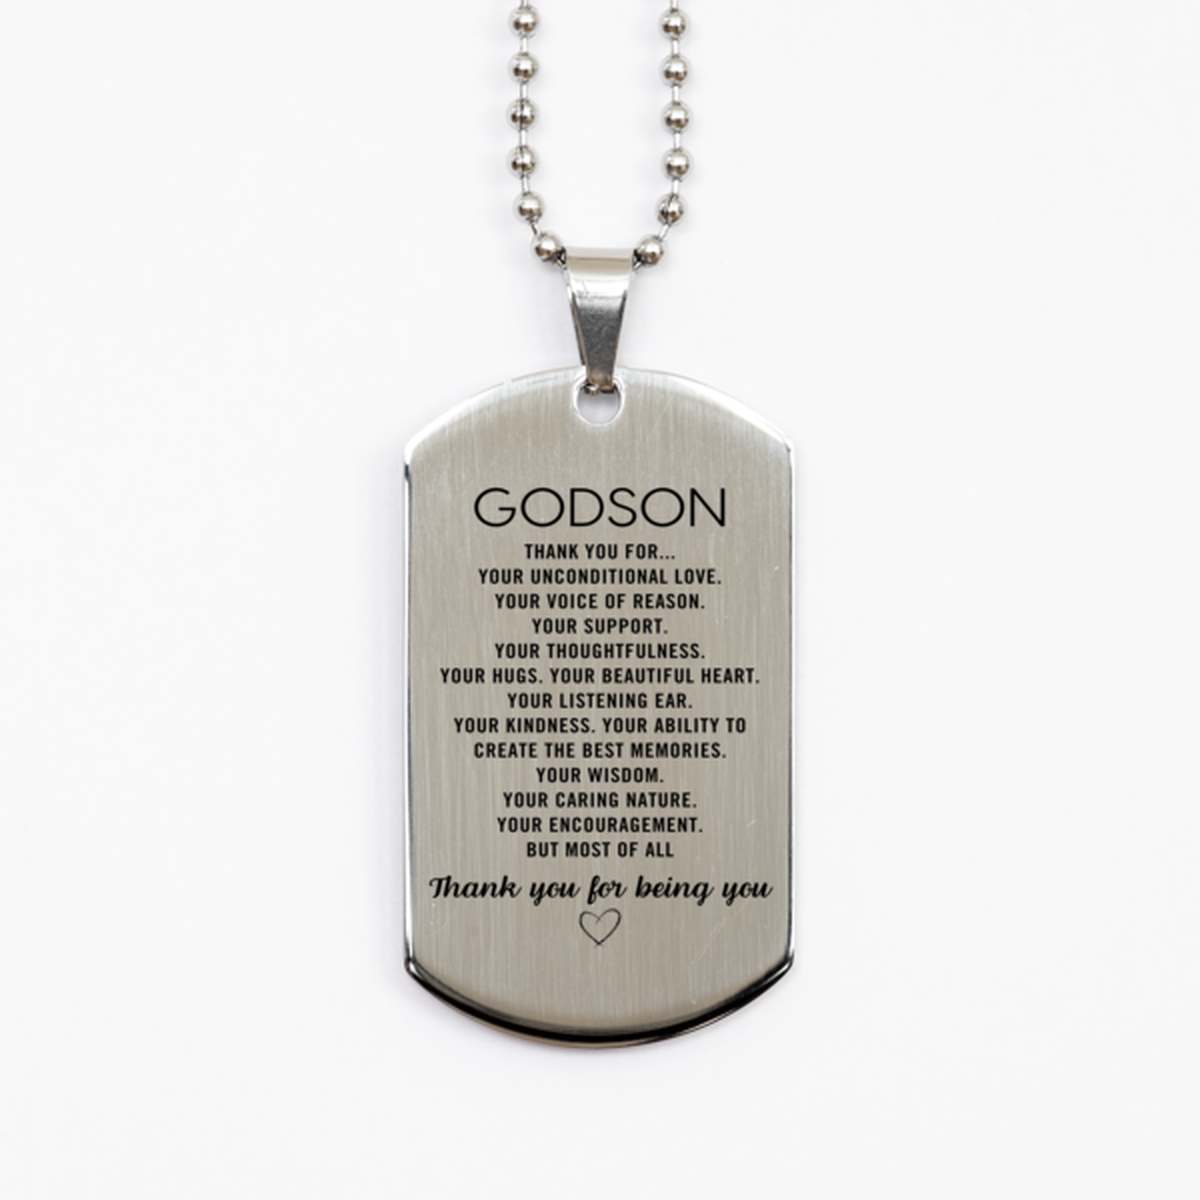 Godson Silver Dog Tag Custom, Engraved Gifts For Godson Christmas Graduation Birthday Gifts for Men Women Godson Thank you for Your unconditional love